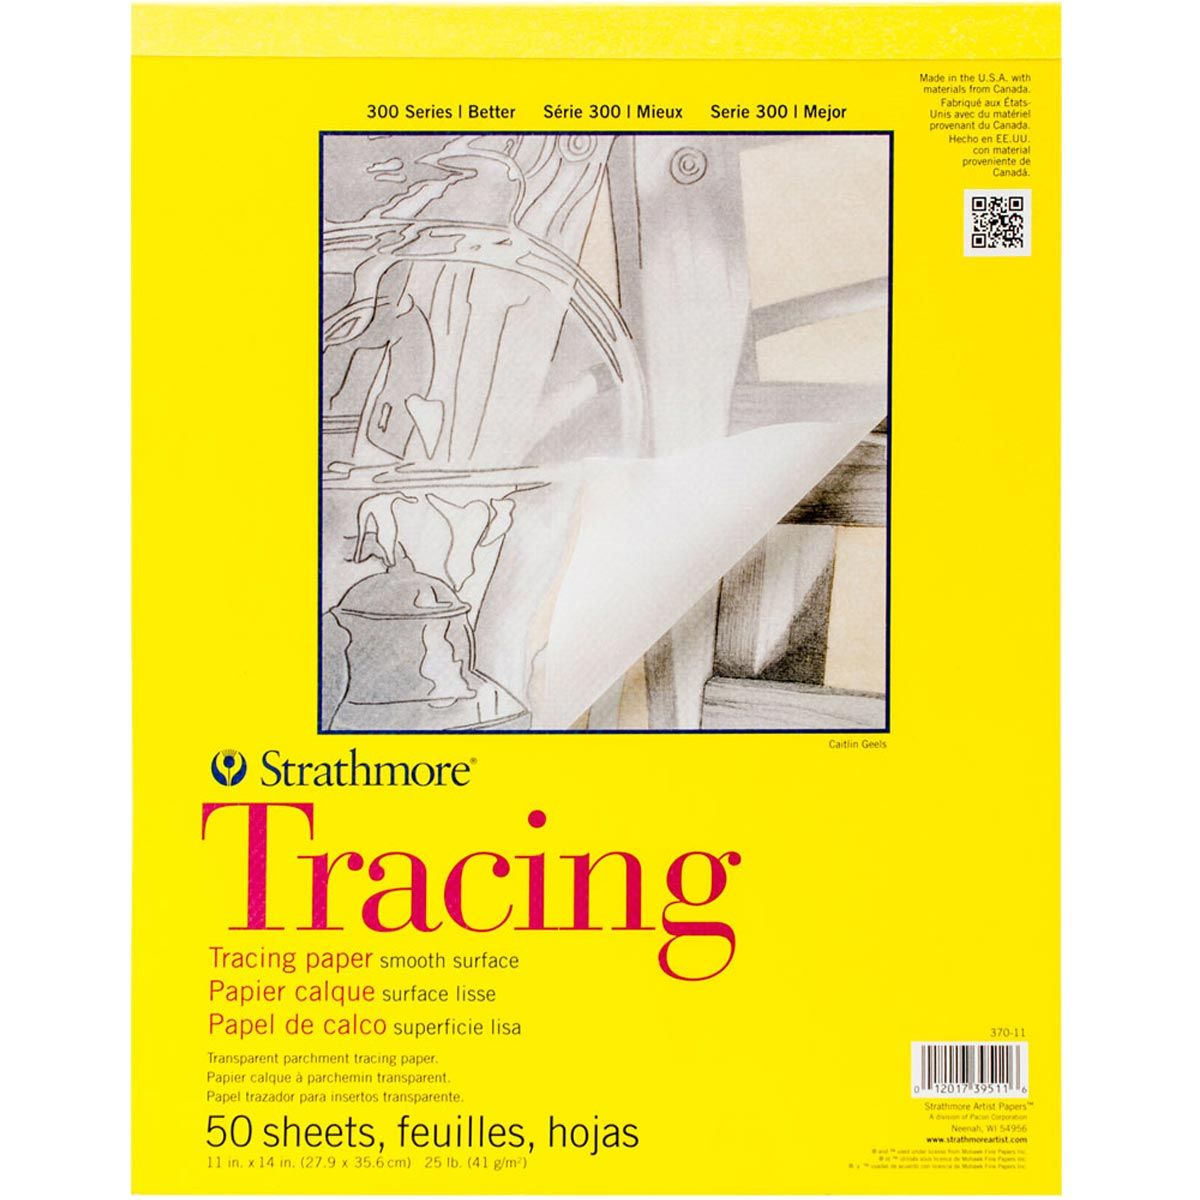 Strathmore 300 Series Tracing Paper Pad 50 Sheets 11"x 14"